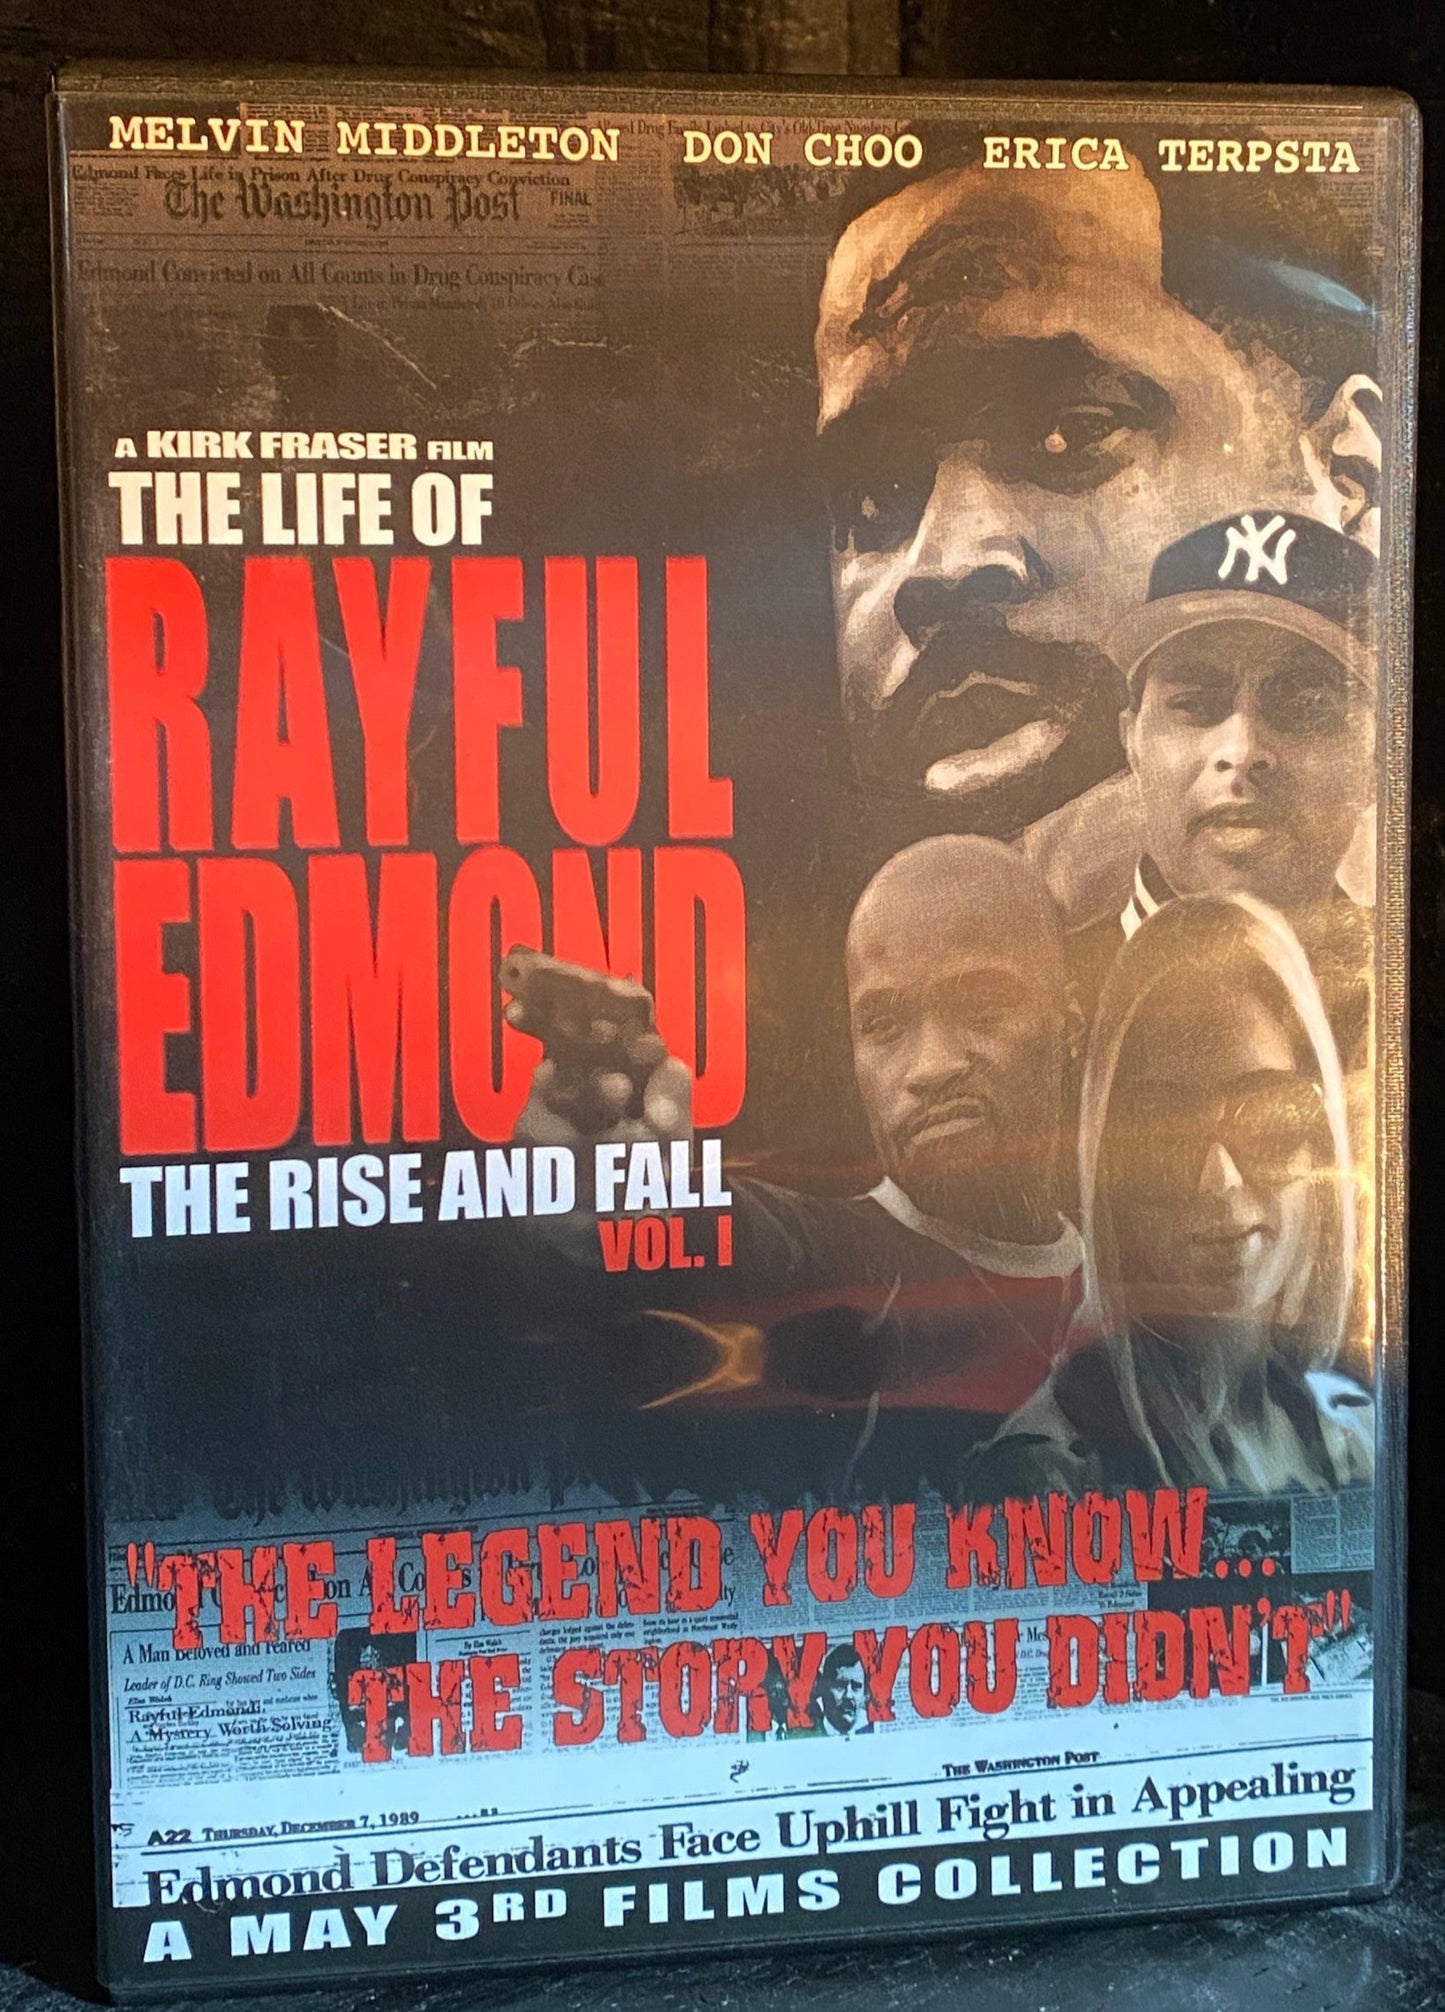 The Life of Rayful Edmond - Rise and Fall Vol. 1